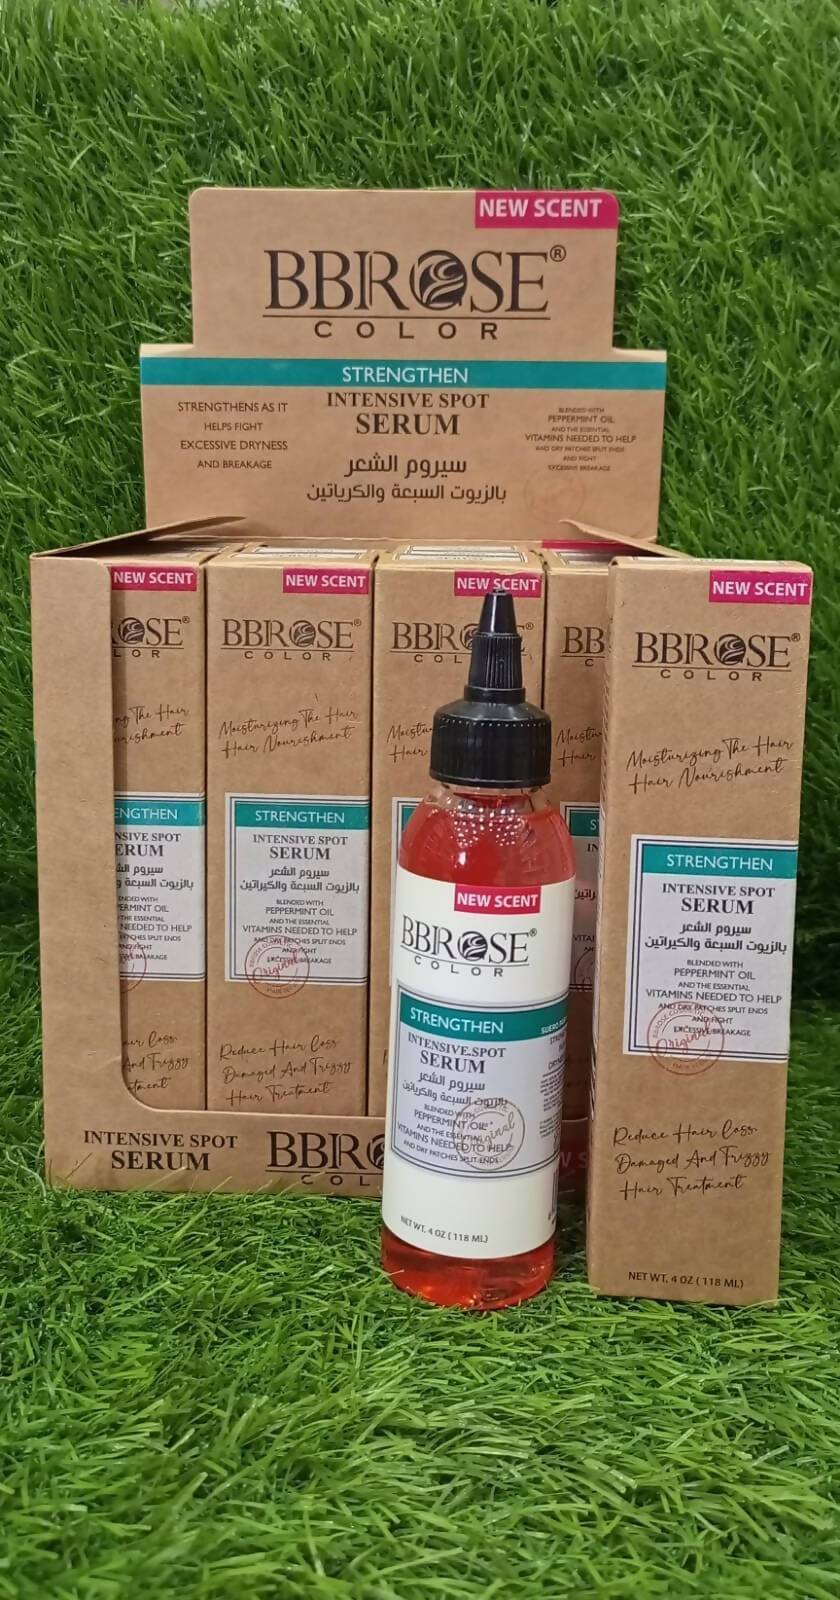 New Scent Bbrose Color Strengthen Intensive Spot Serum red